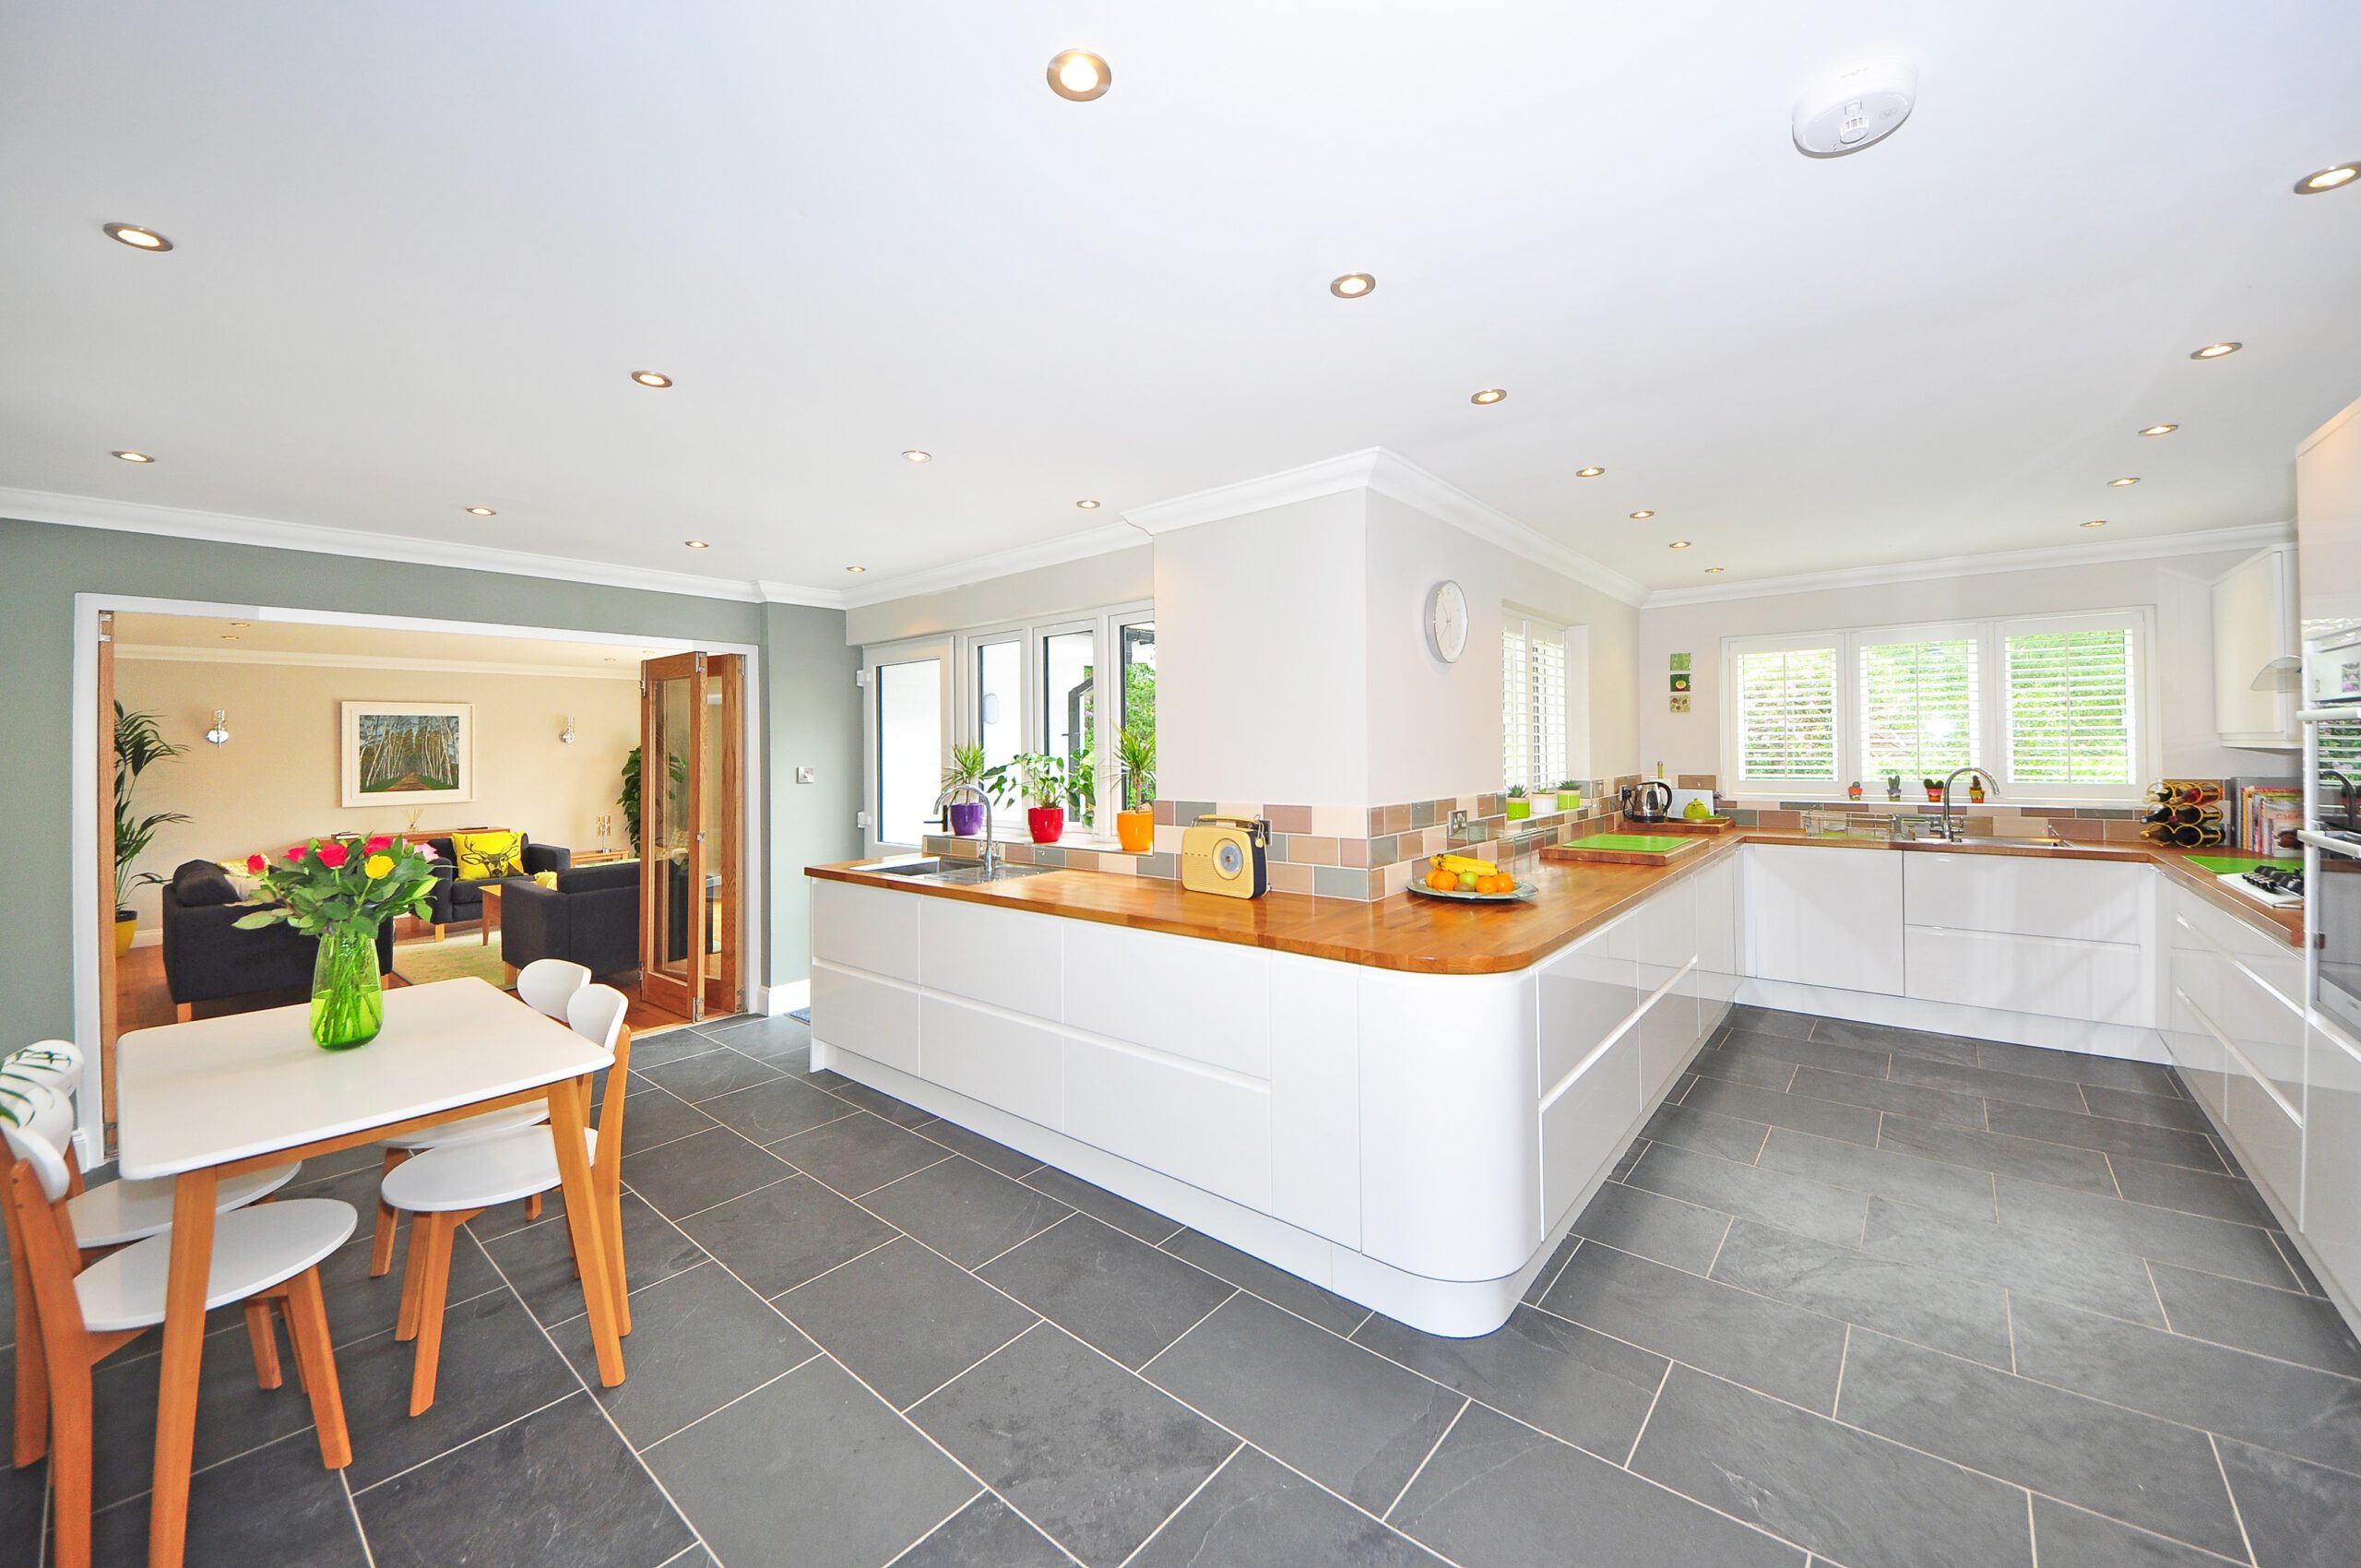 How to Choose the Right Tiles for Your Kitchen: A Homeowners Guide